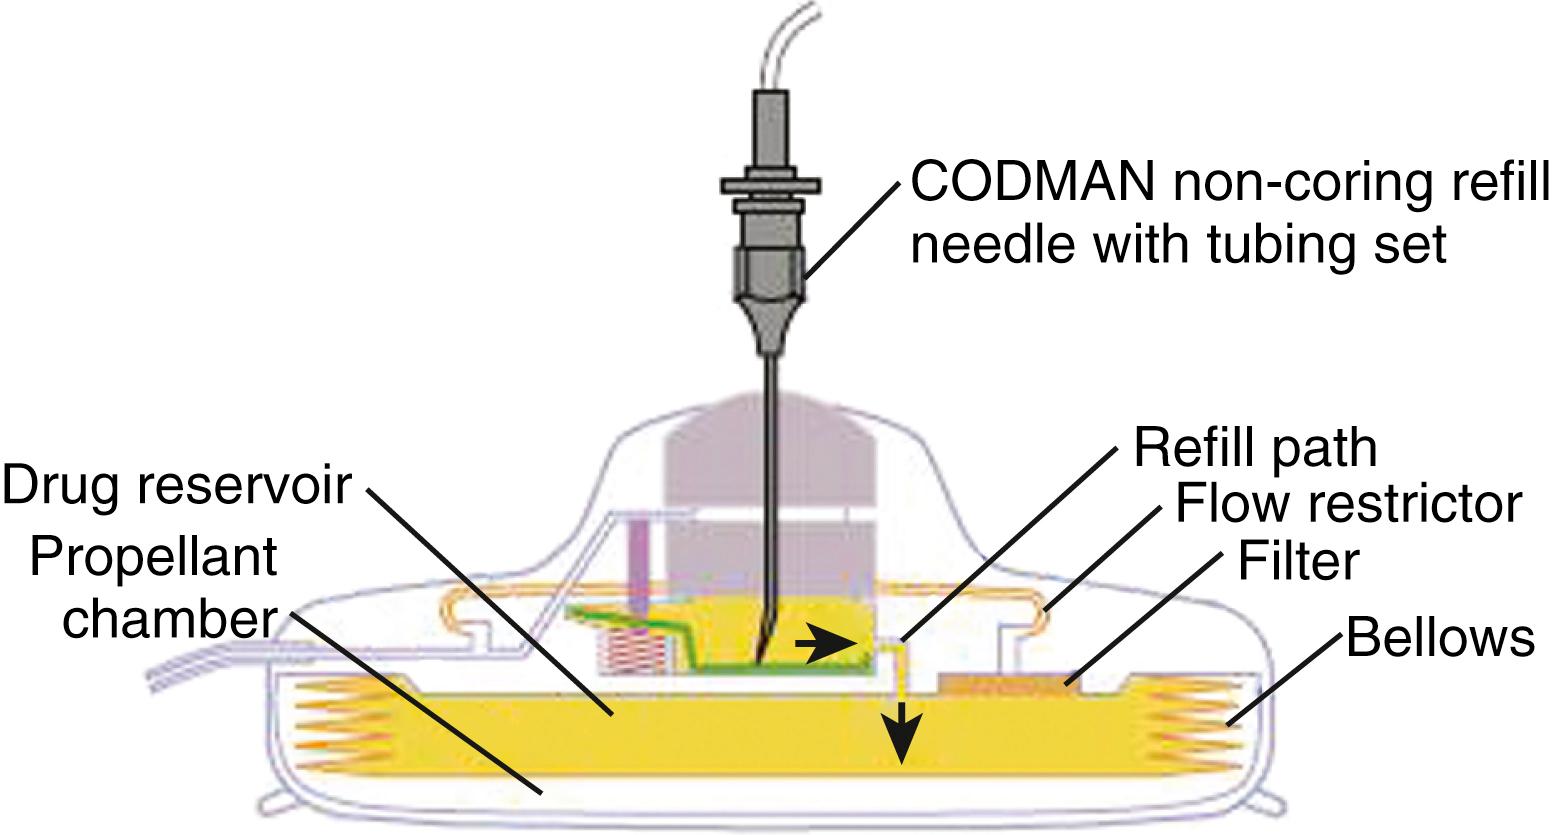 FIGURE 120.2, Advancement of cylindrical electrode through an epidural needle. Note that steering the electrode is possible by rotating the stylet hub of the electrode.